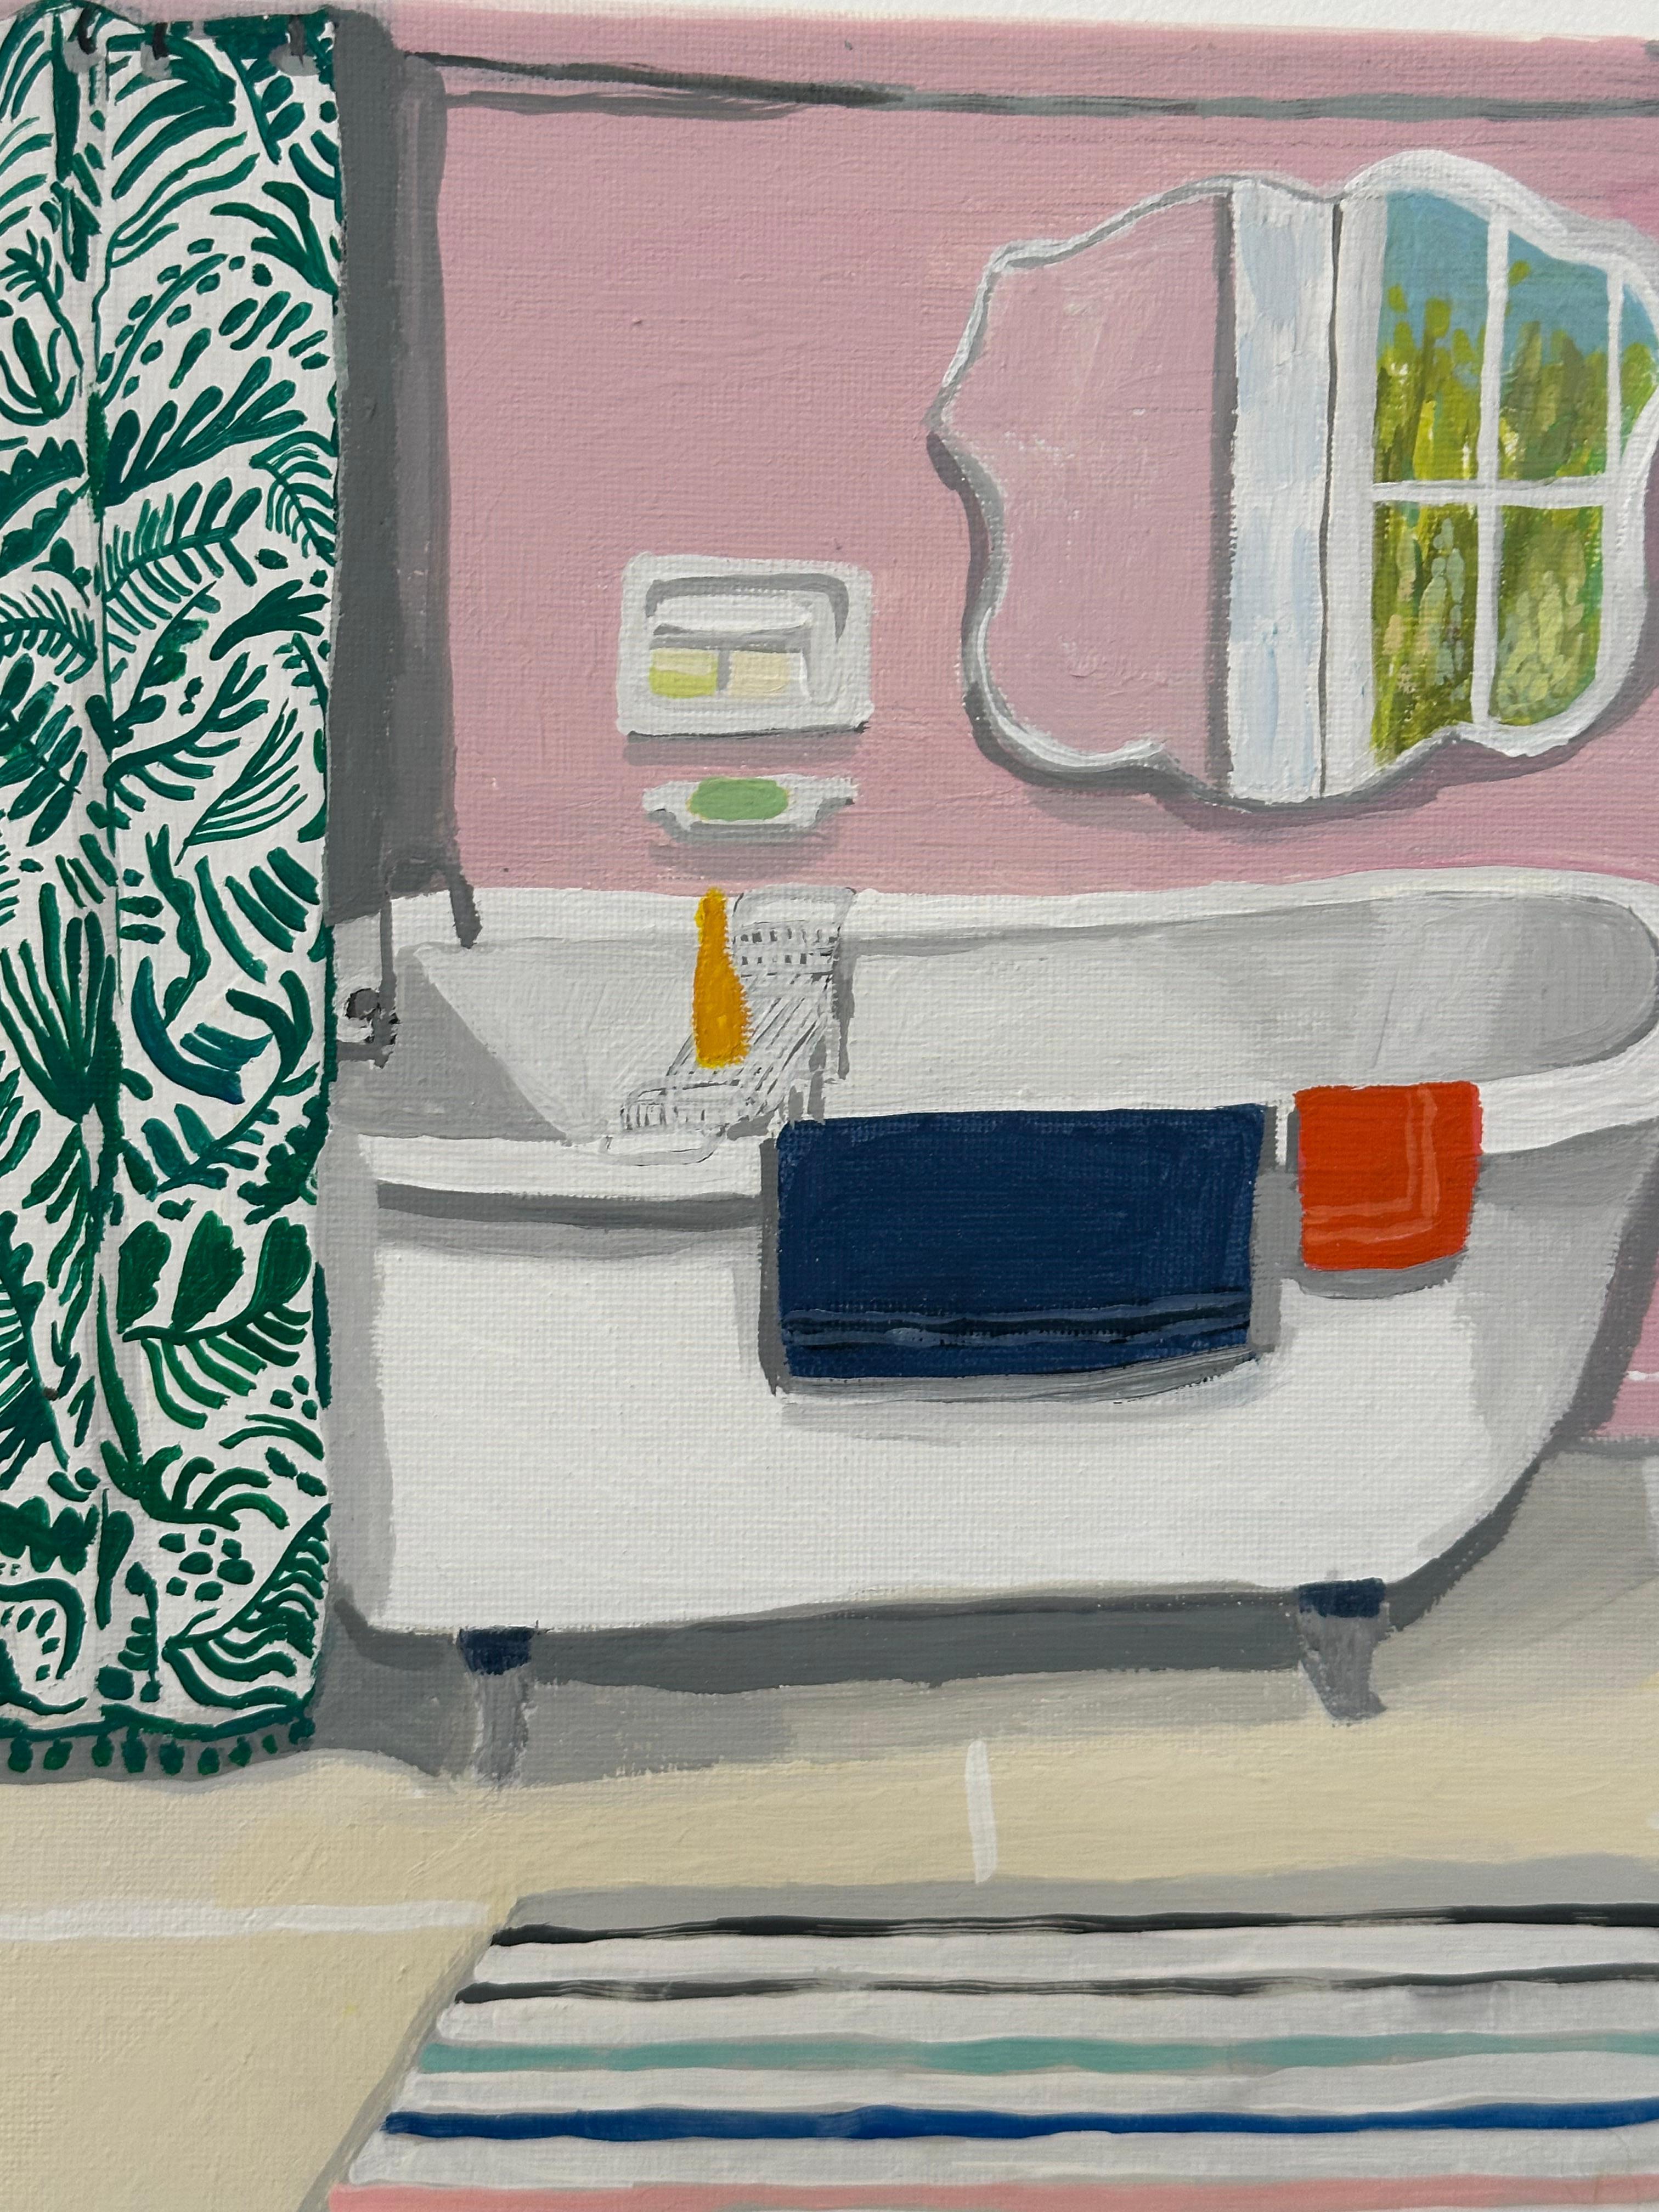 A clawfoot tub stands in a pink bathroom with a green botanical pattern shower curtain. A colorful striped bathmat is a cheerful accent to a yellow tile floor.

In her work, Polly Shindler is always thinking about the psychology of a place. Ideas